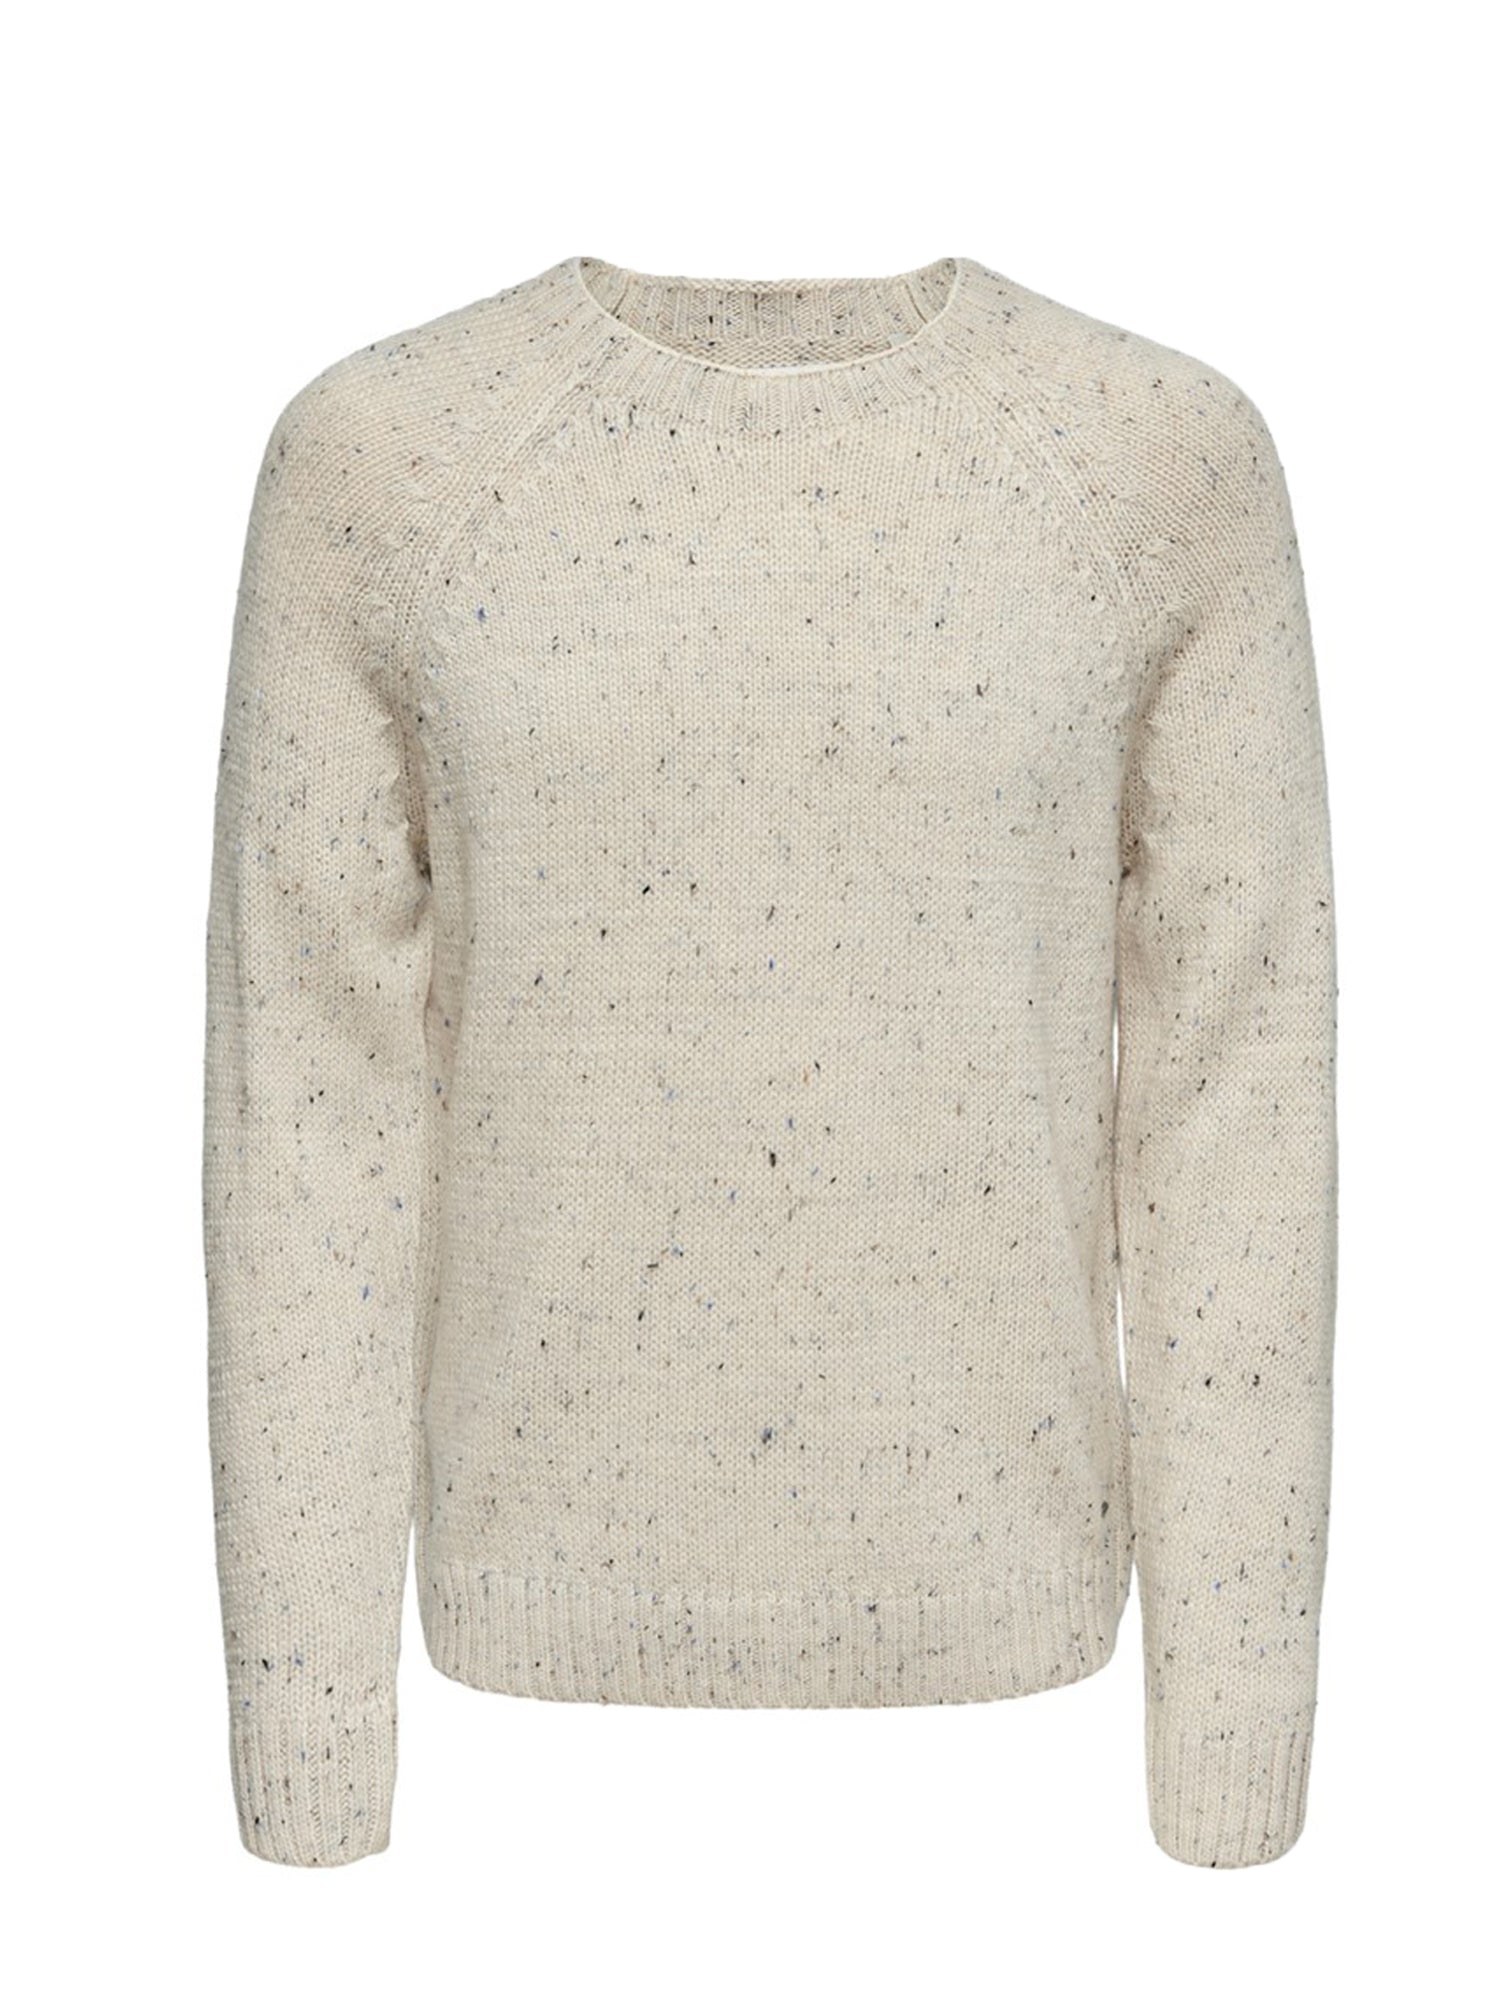 ONLY& SONS PULLOVER PETER BIANCO SPORCO